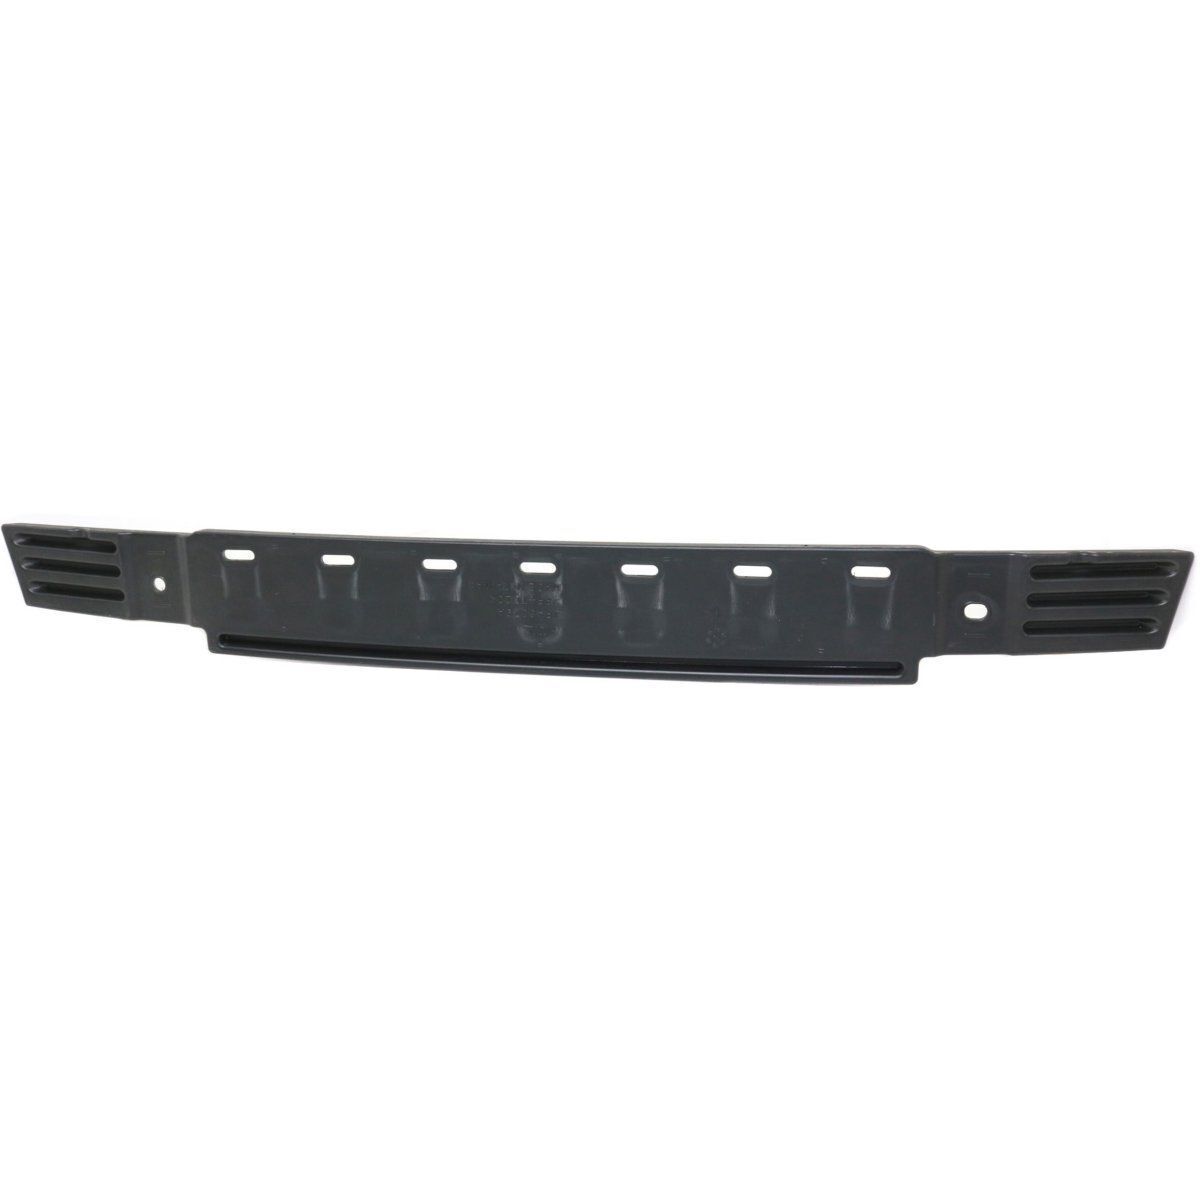 2018-2018 JEEP WRANGLER; Front bumper filler; Std Duty Upper Gap Cover Painted to Match